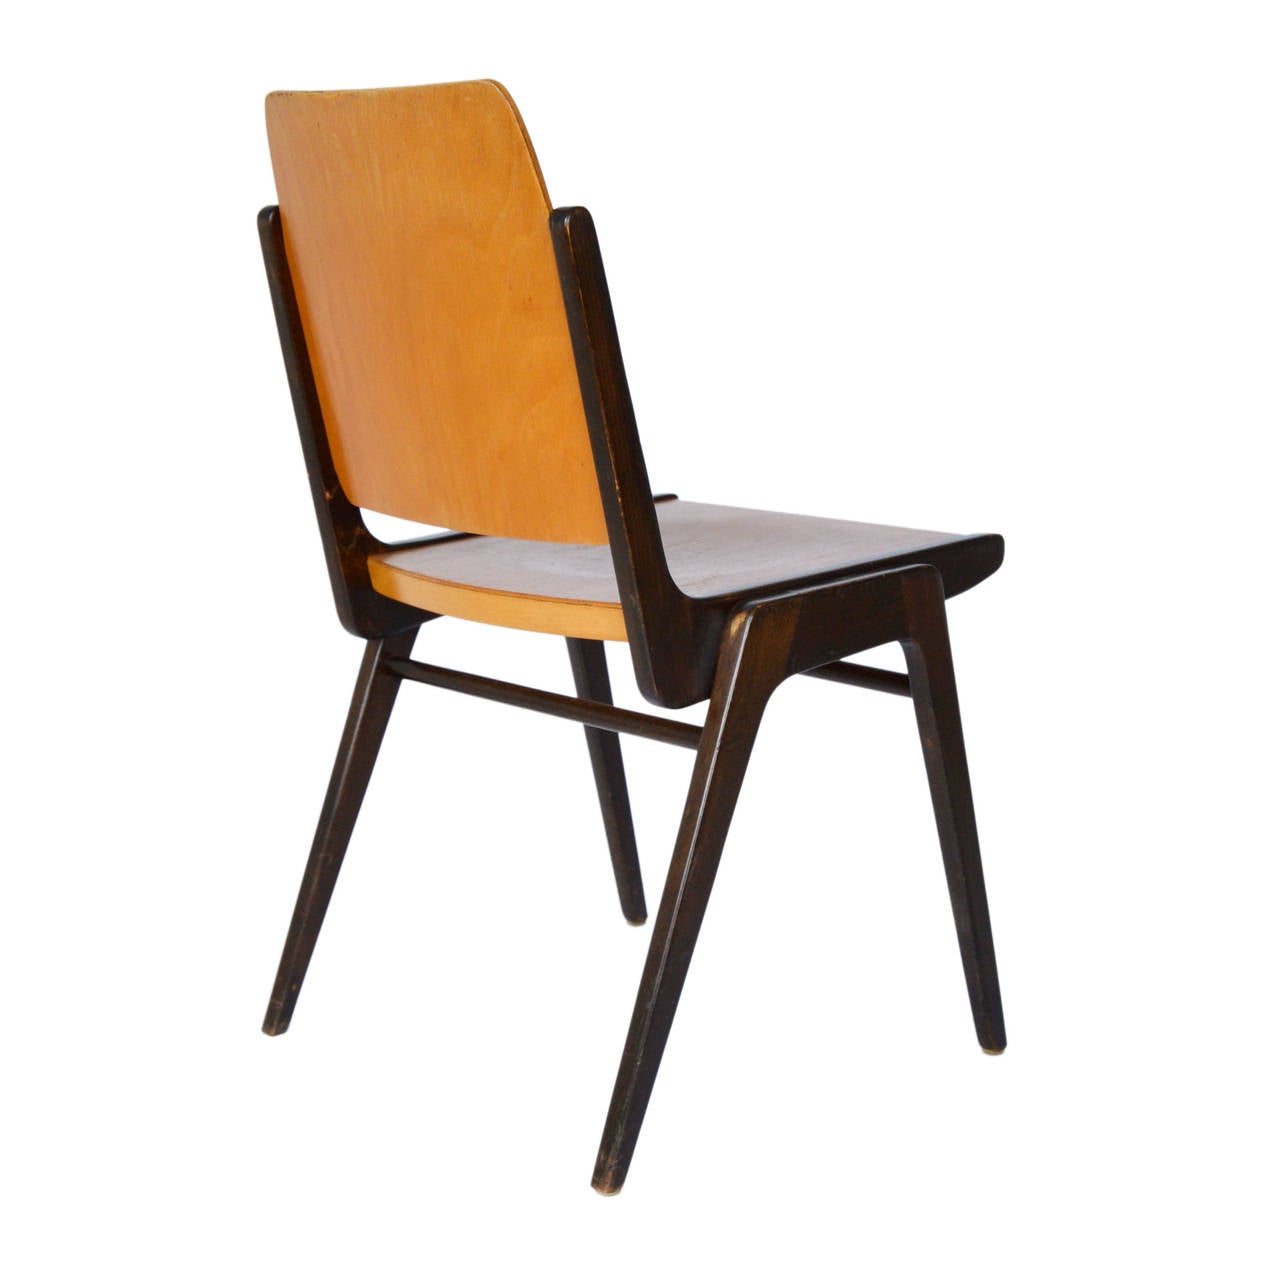 Mid-20th Century One of 12 Stacking Chairs Franz Schuster, Bicolored Beech, Austria, 1959 For Sale